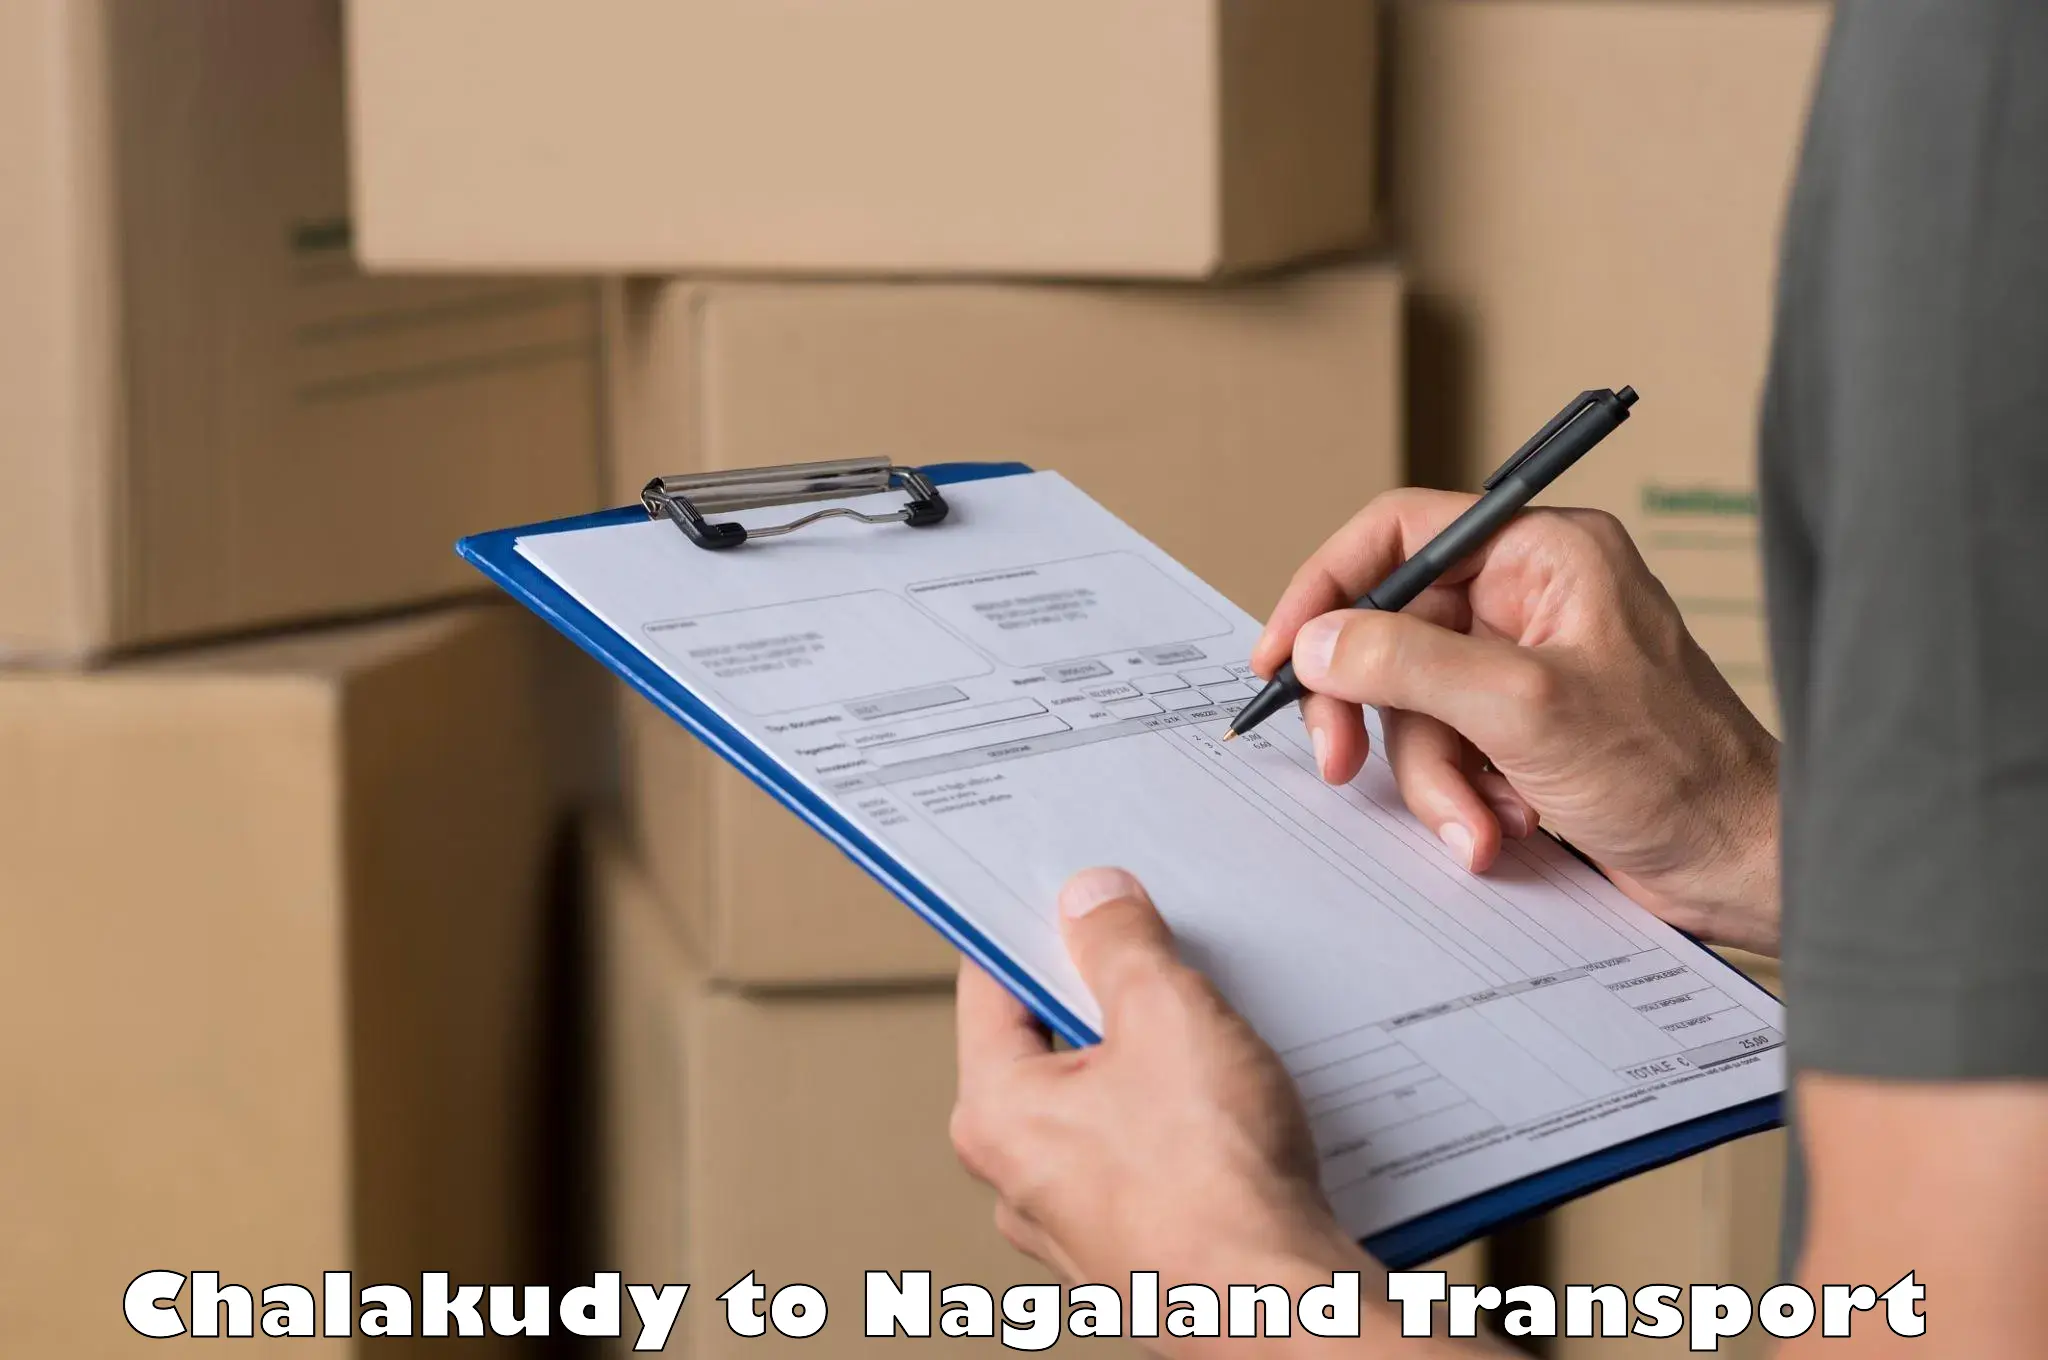 Online transport service Chalakudy to Nagaland